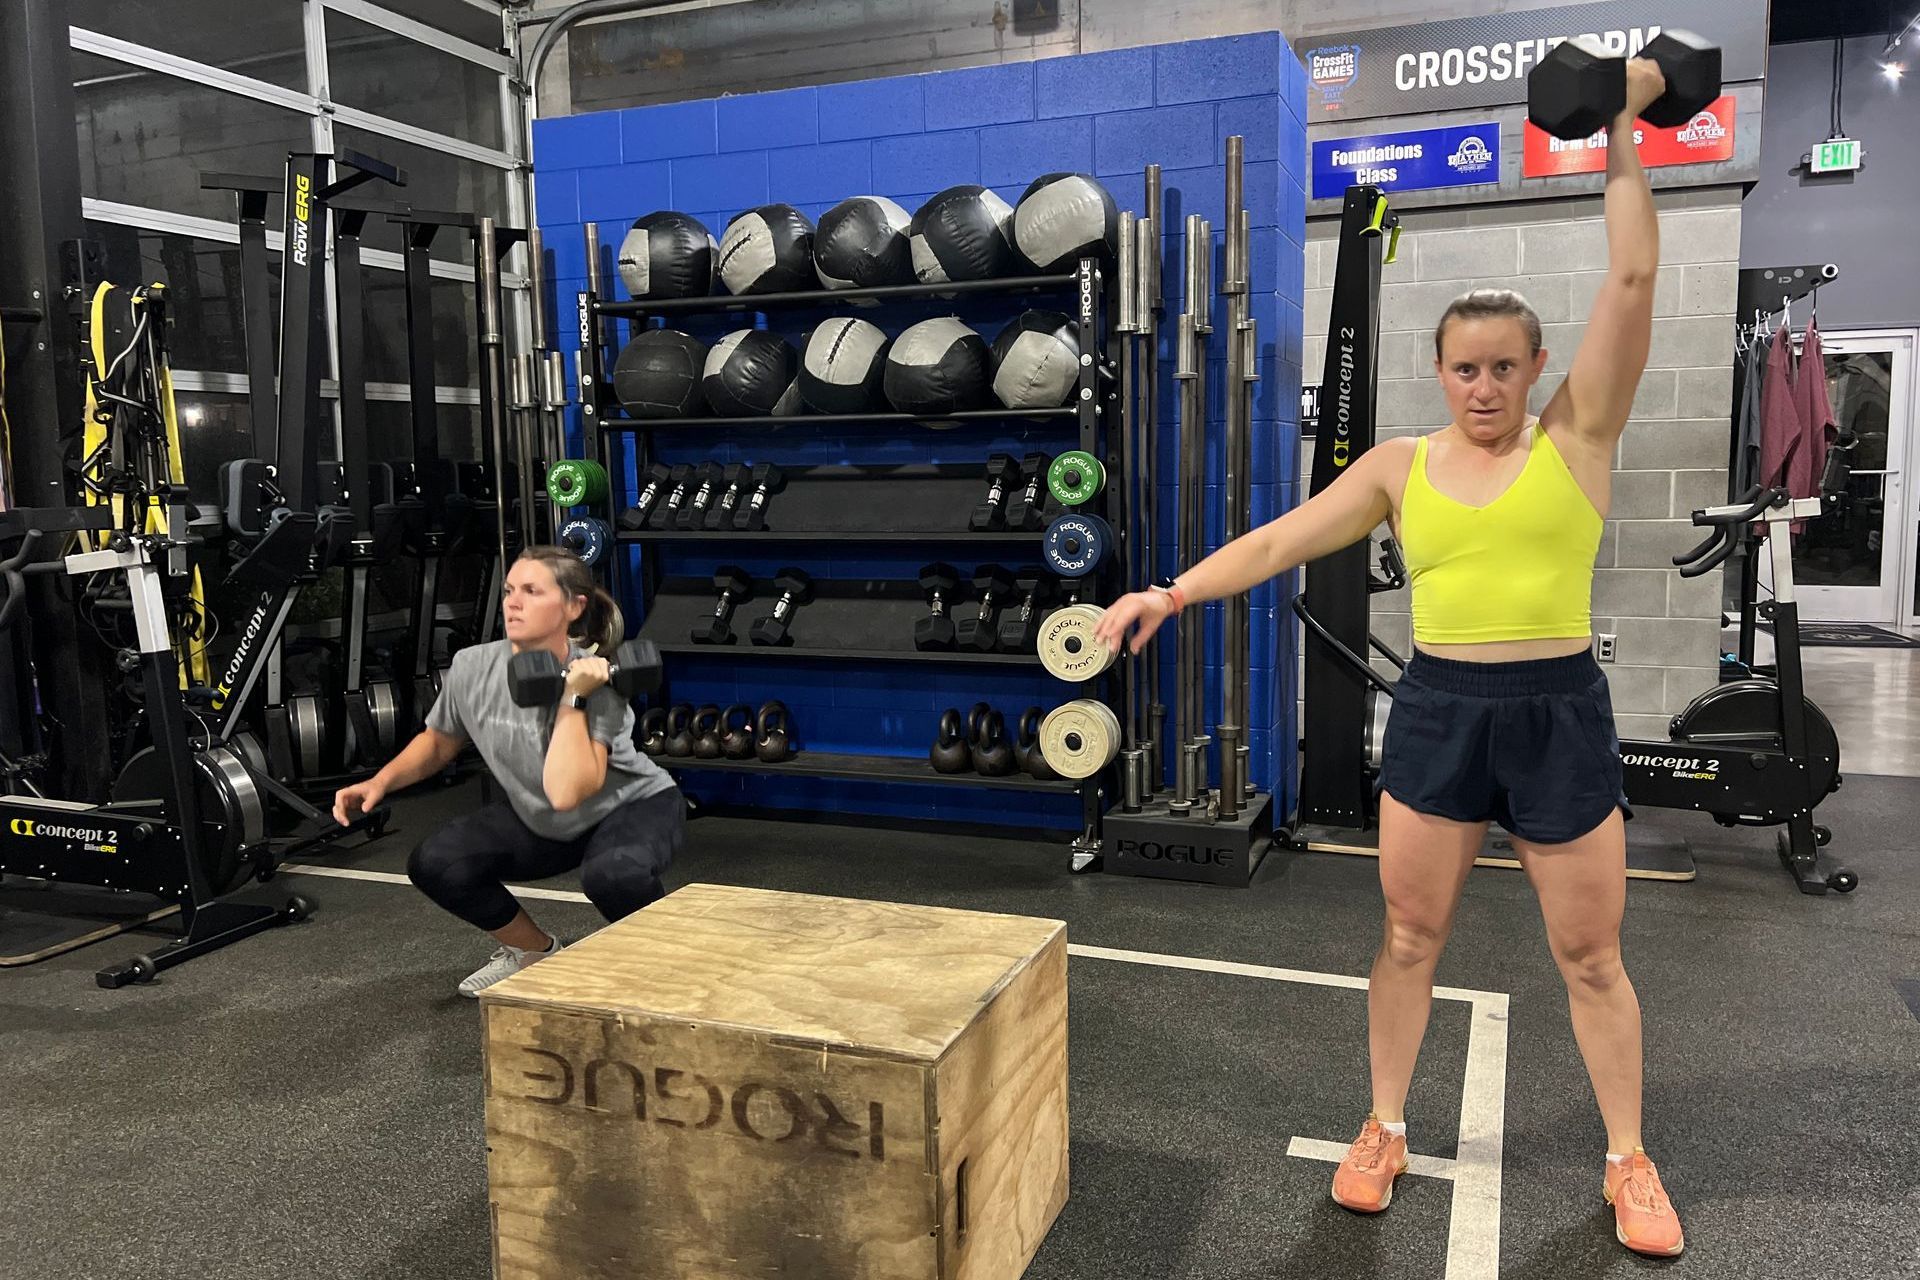 Two women are squatting and lifting dumbbells in a gym.